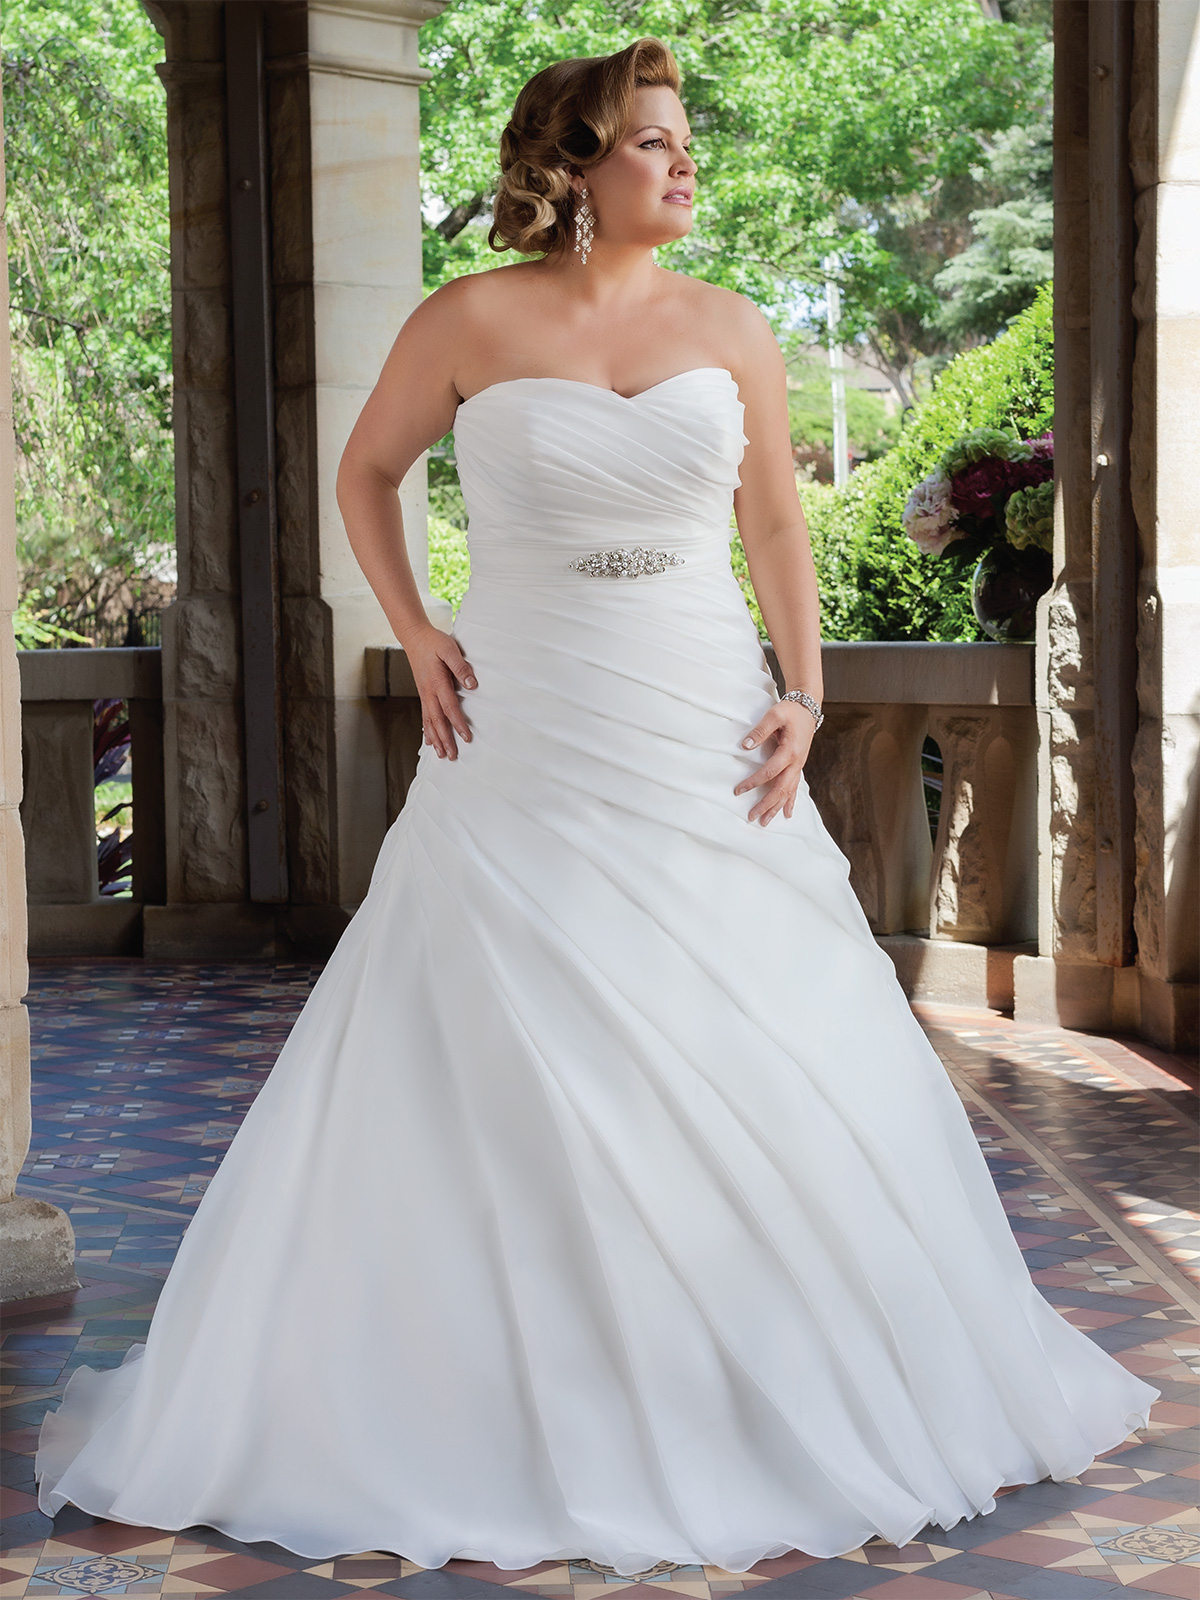 Elegant Wedding Dresses For Plus Size Top 10 Find The Perfect Venue For Your Special Wedding Day 7845